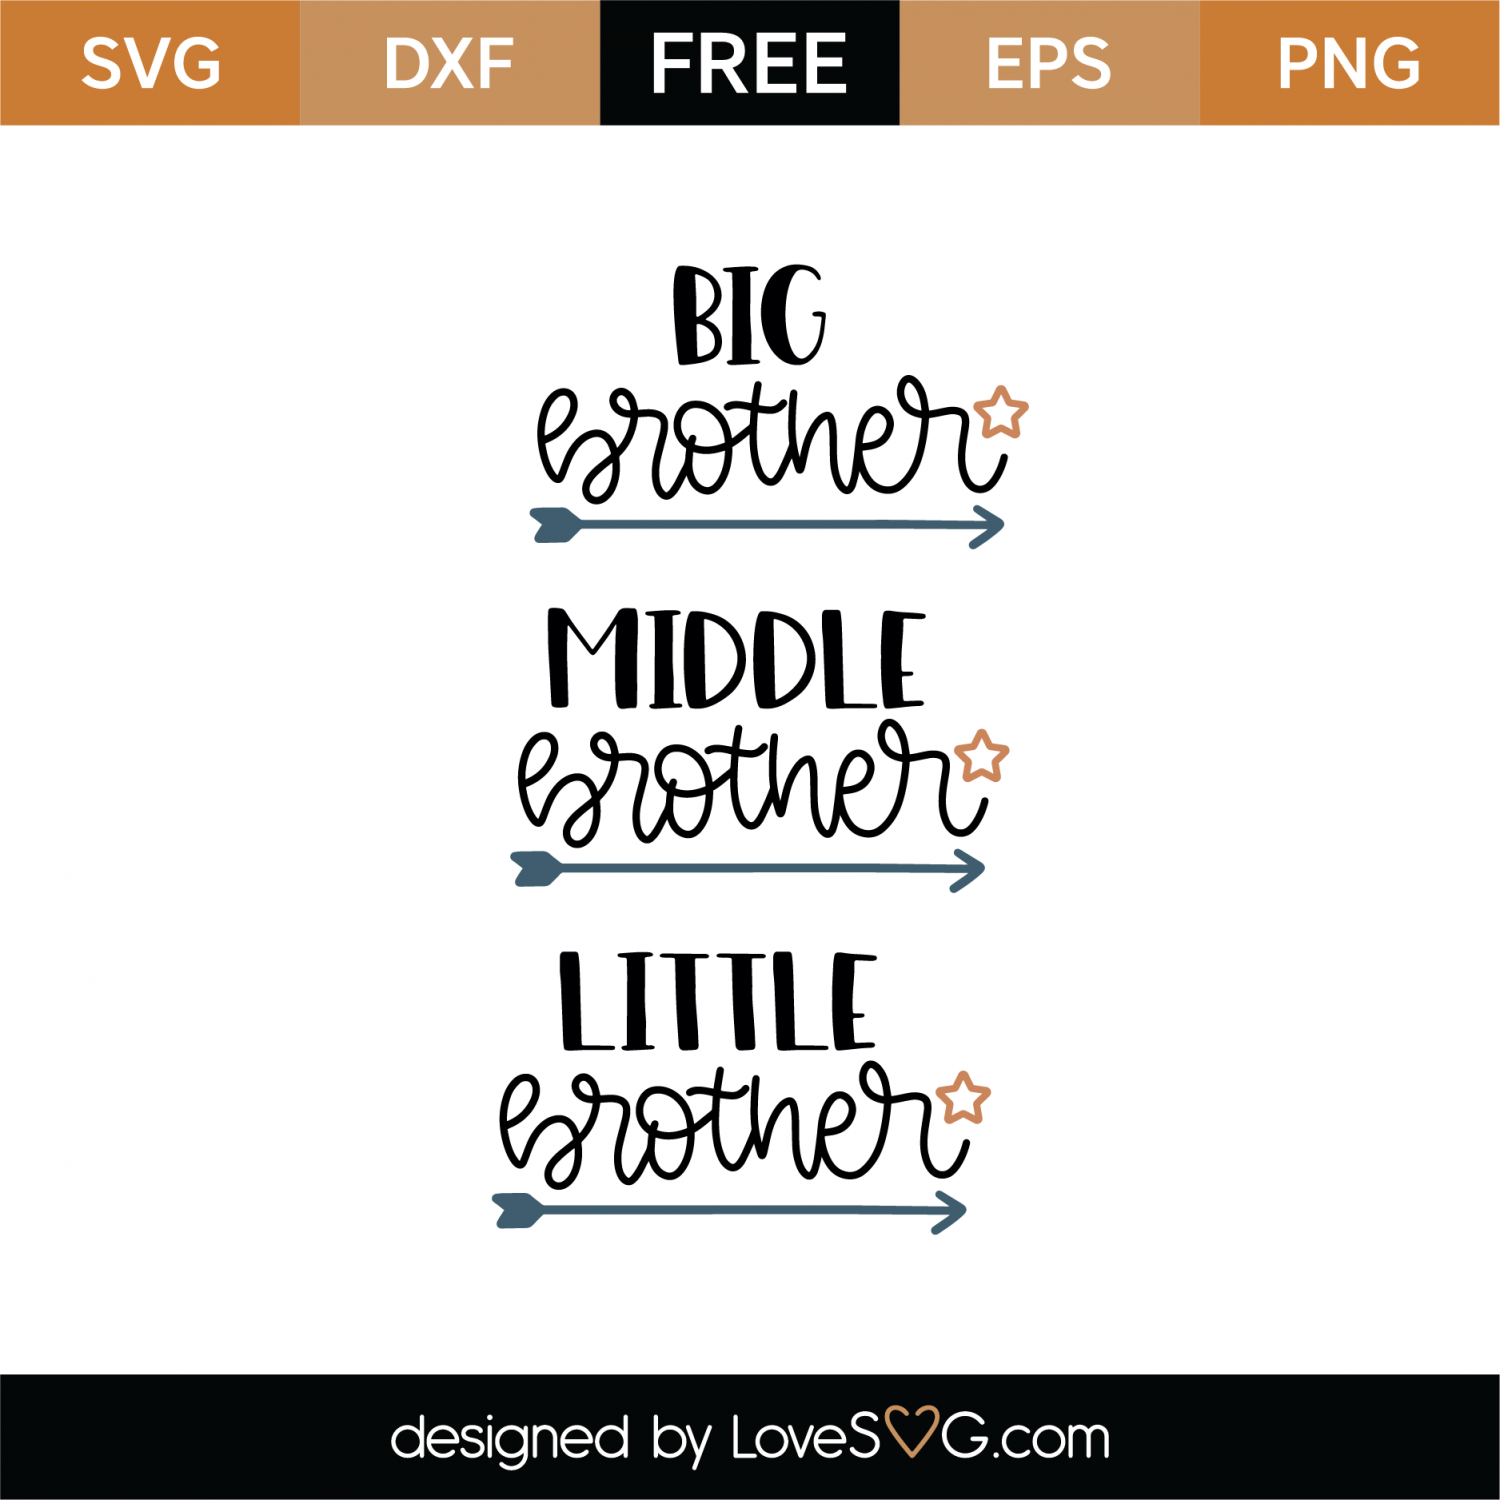 Download Free Big Brother Middle Brother Little Brother SVG Cut ...